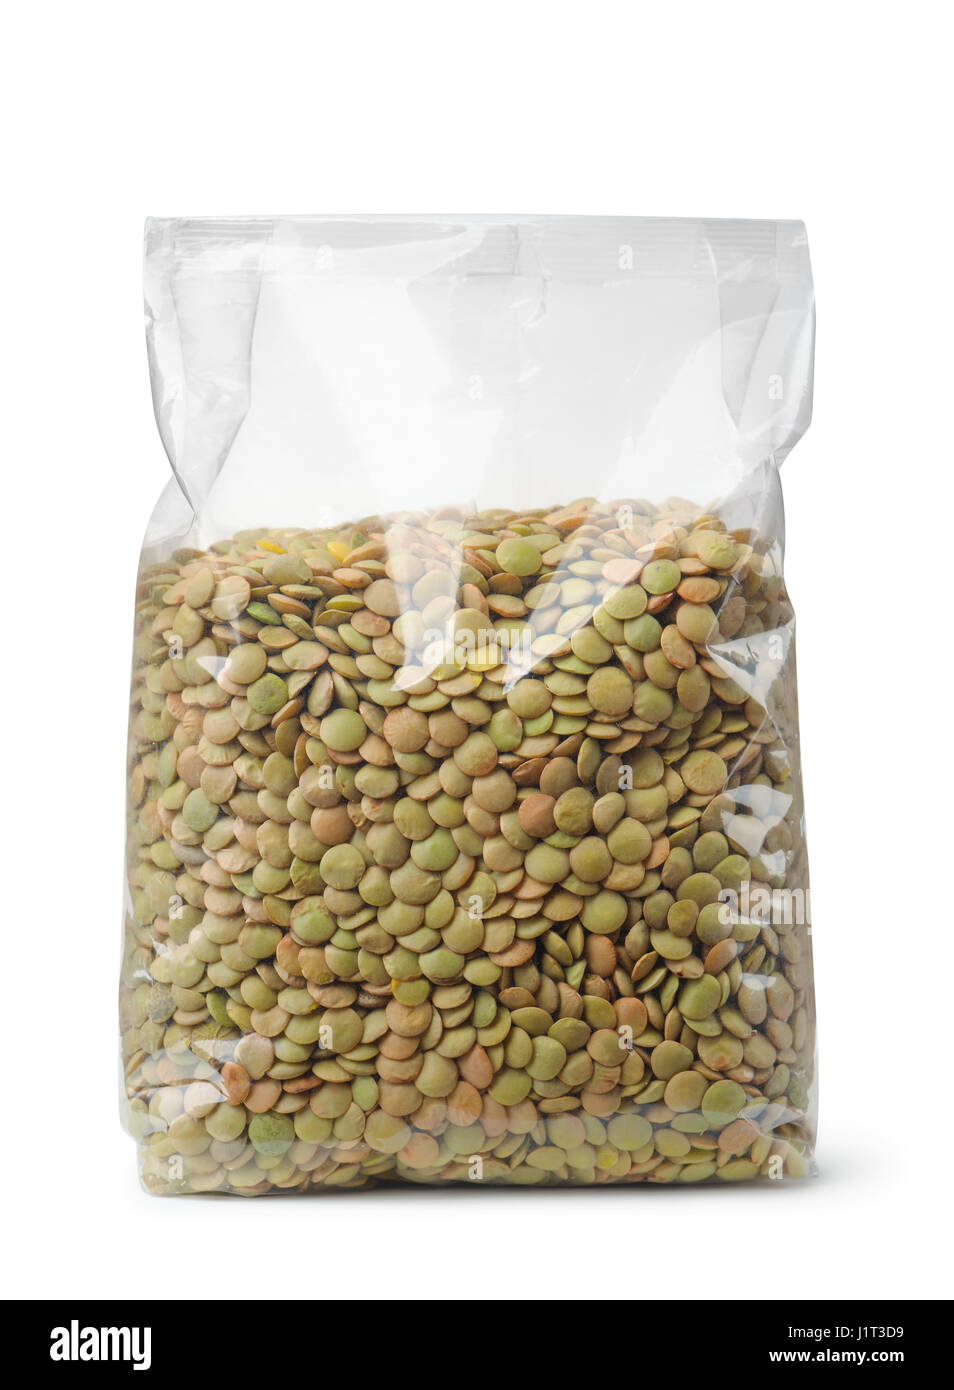 Plastic packet of dried lentil isolated on white Stock Photo